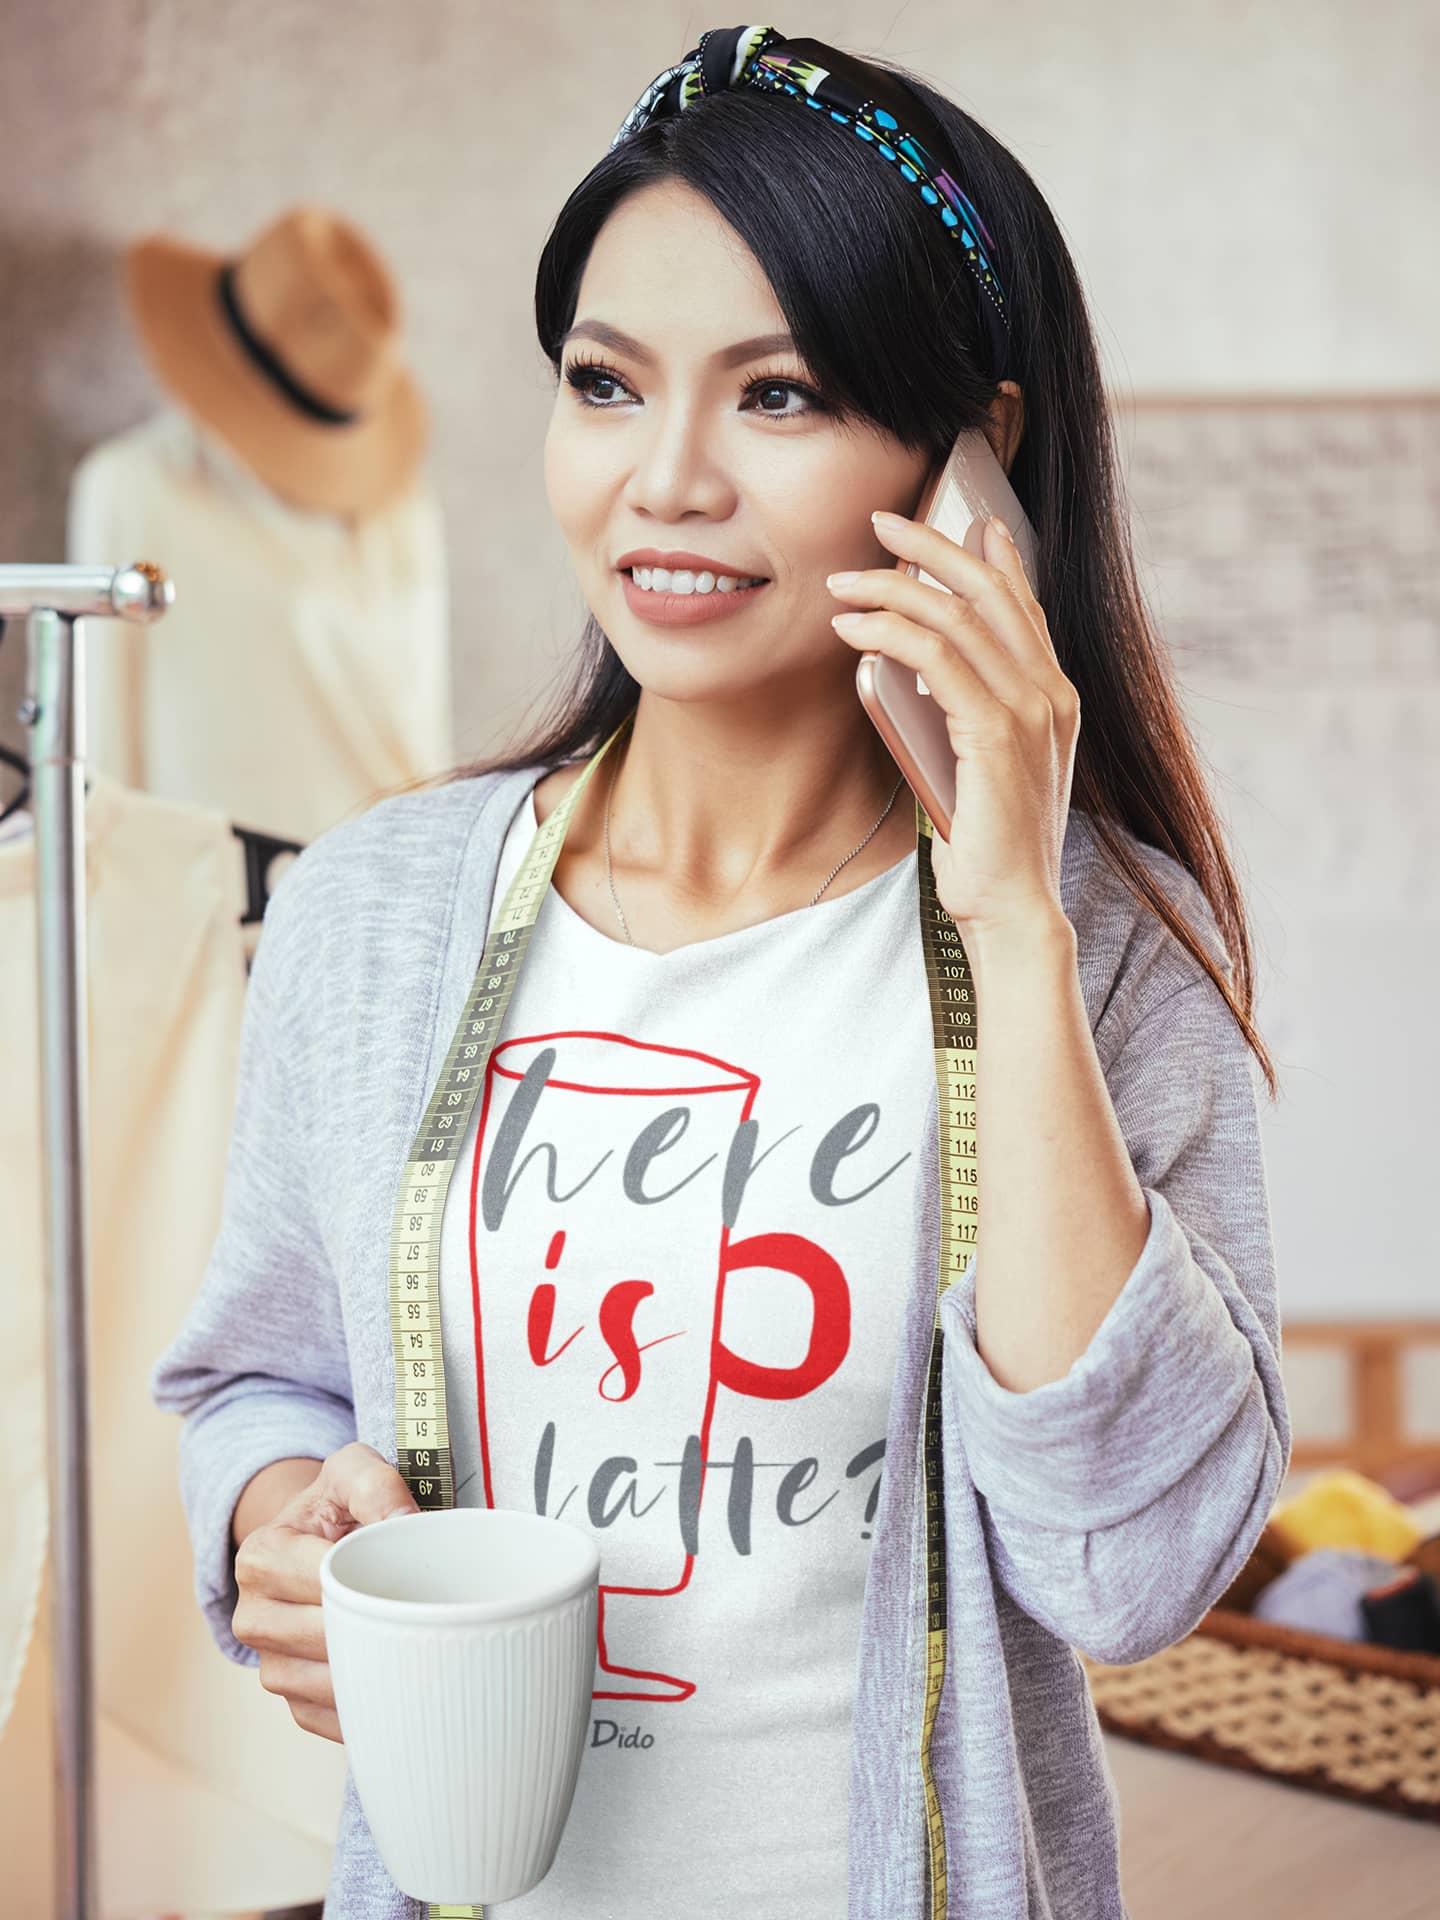 Woman T Shirt For Coffee Lovers by Mike Dido